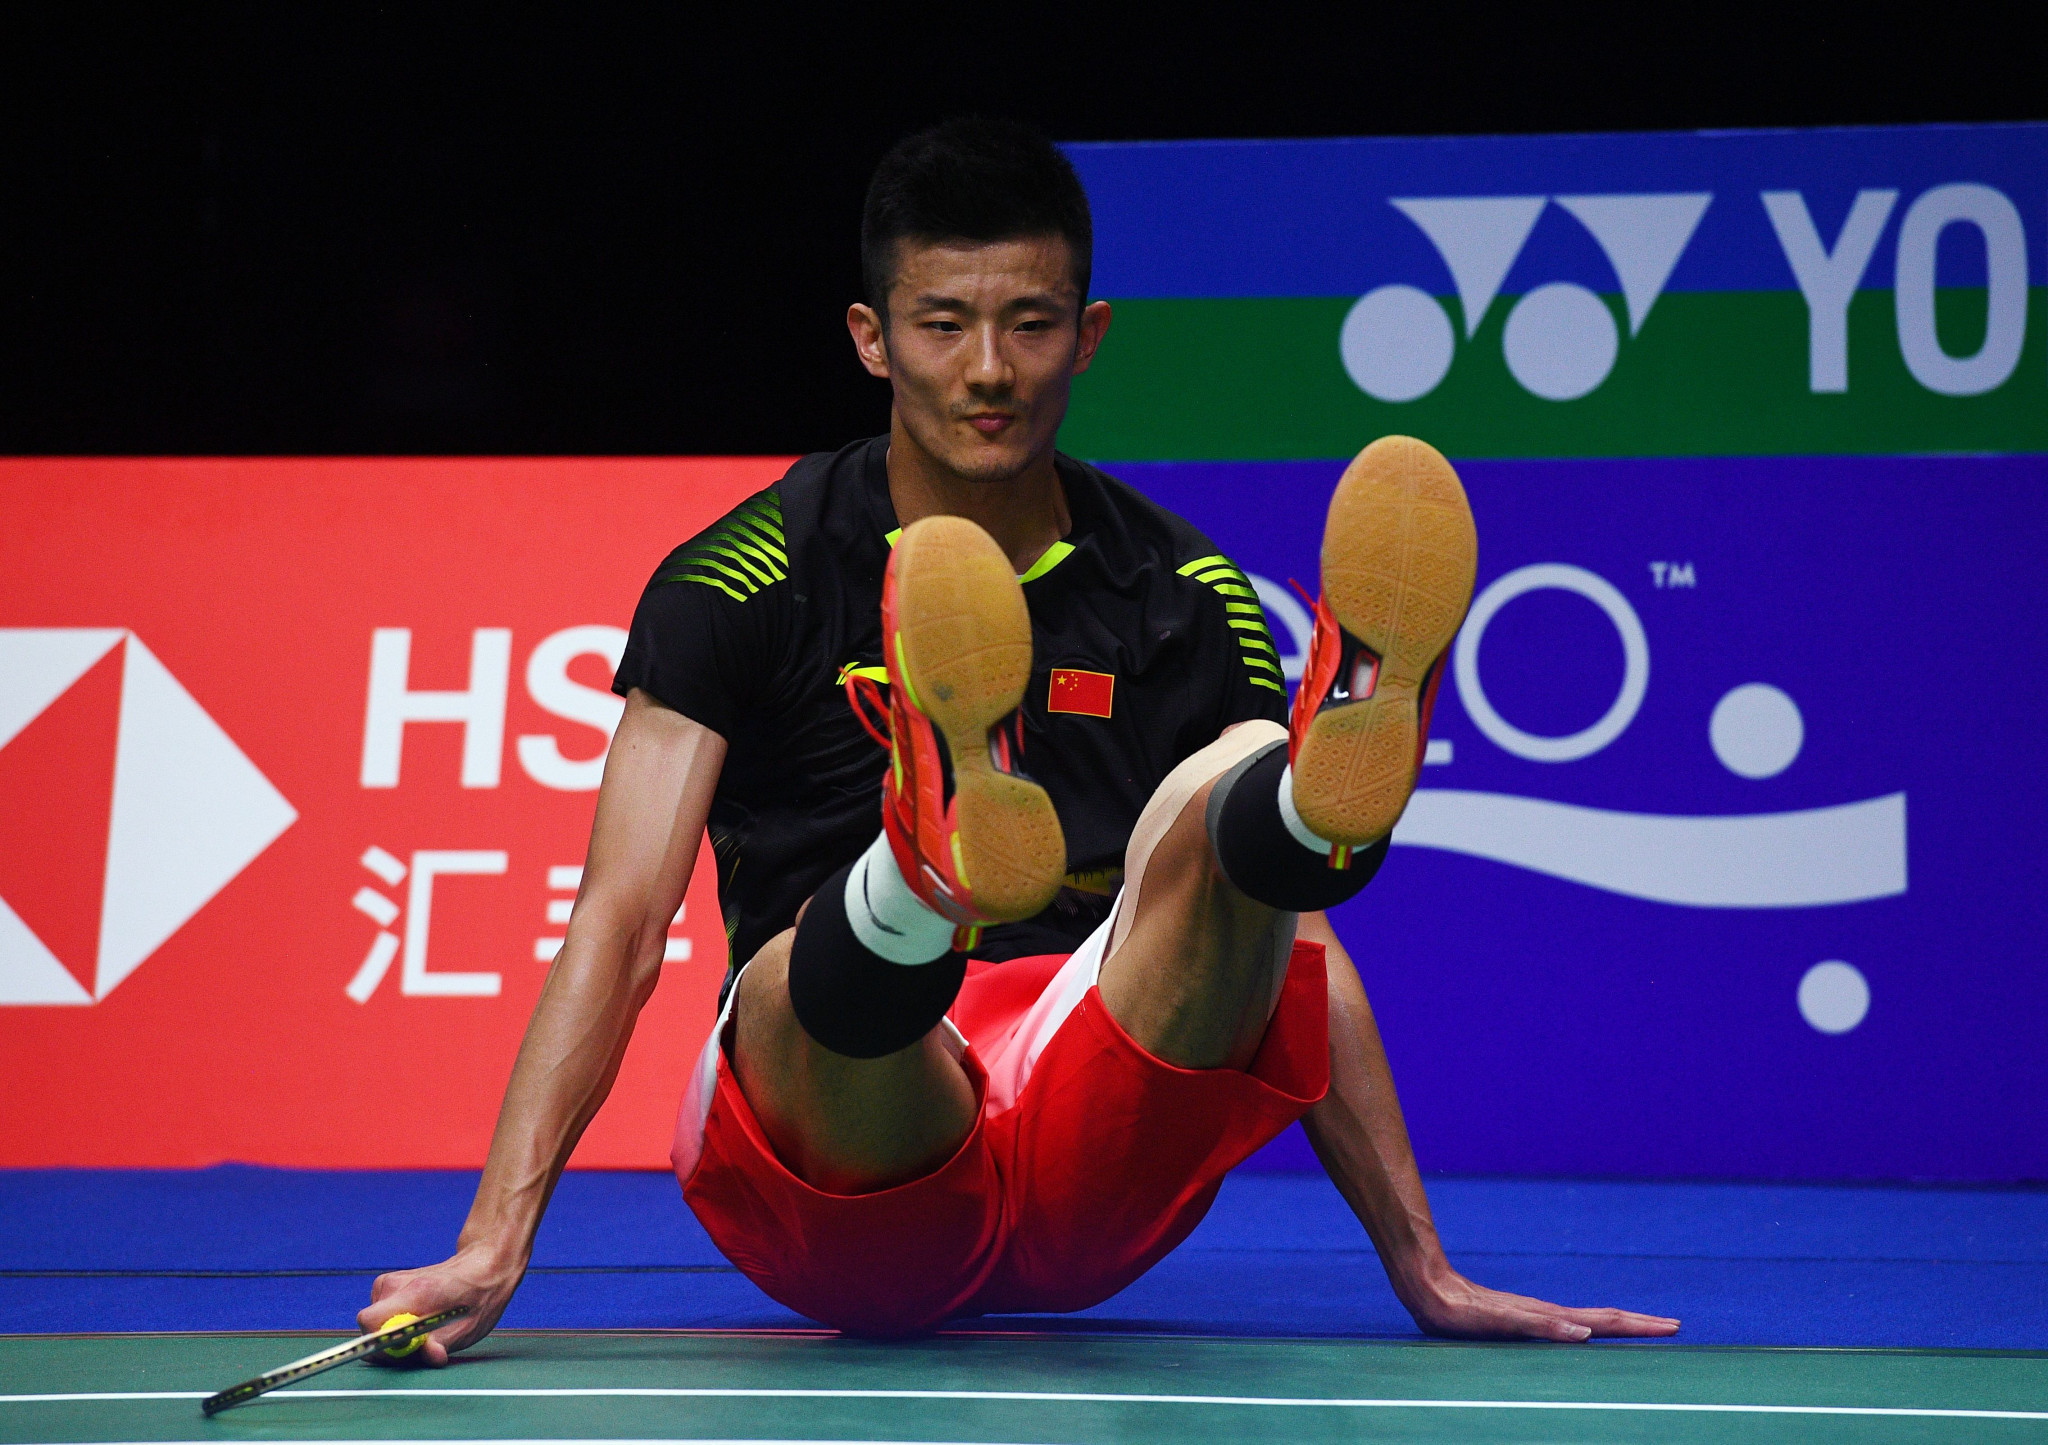 Top seeds and defending singles champions beaten at Badminton World Championships